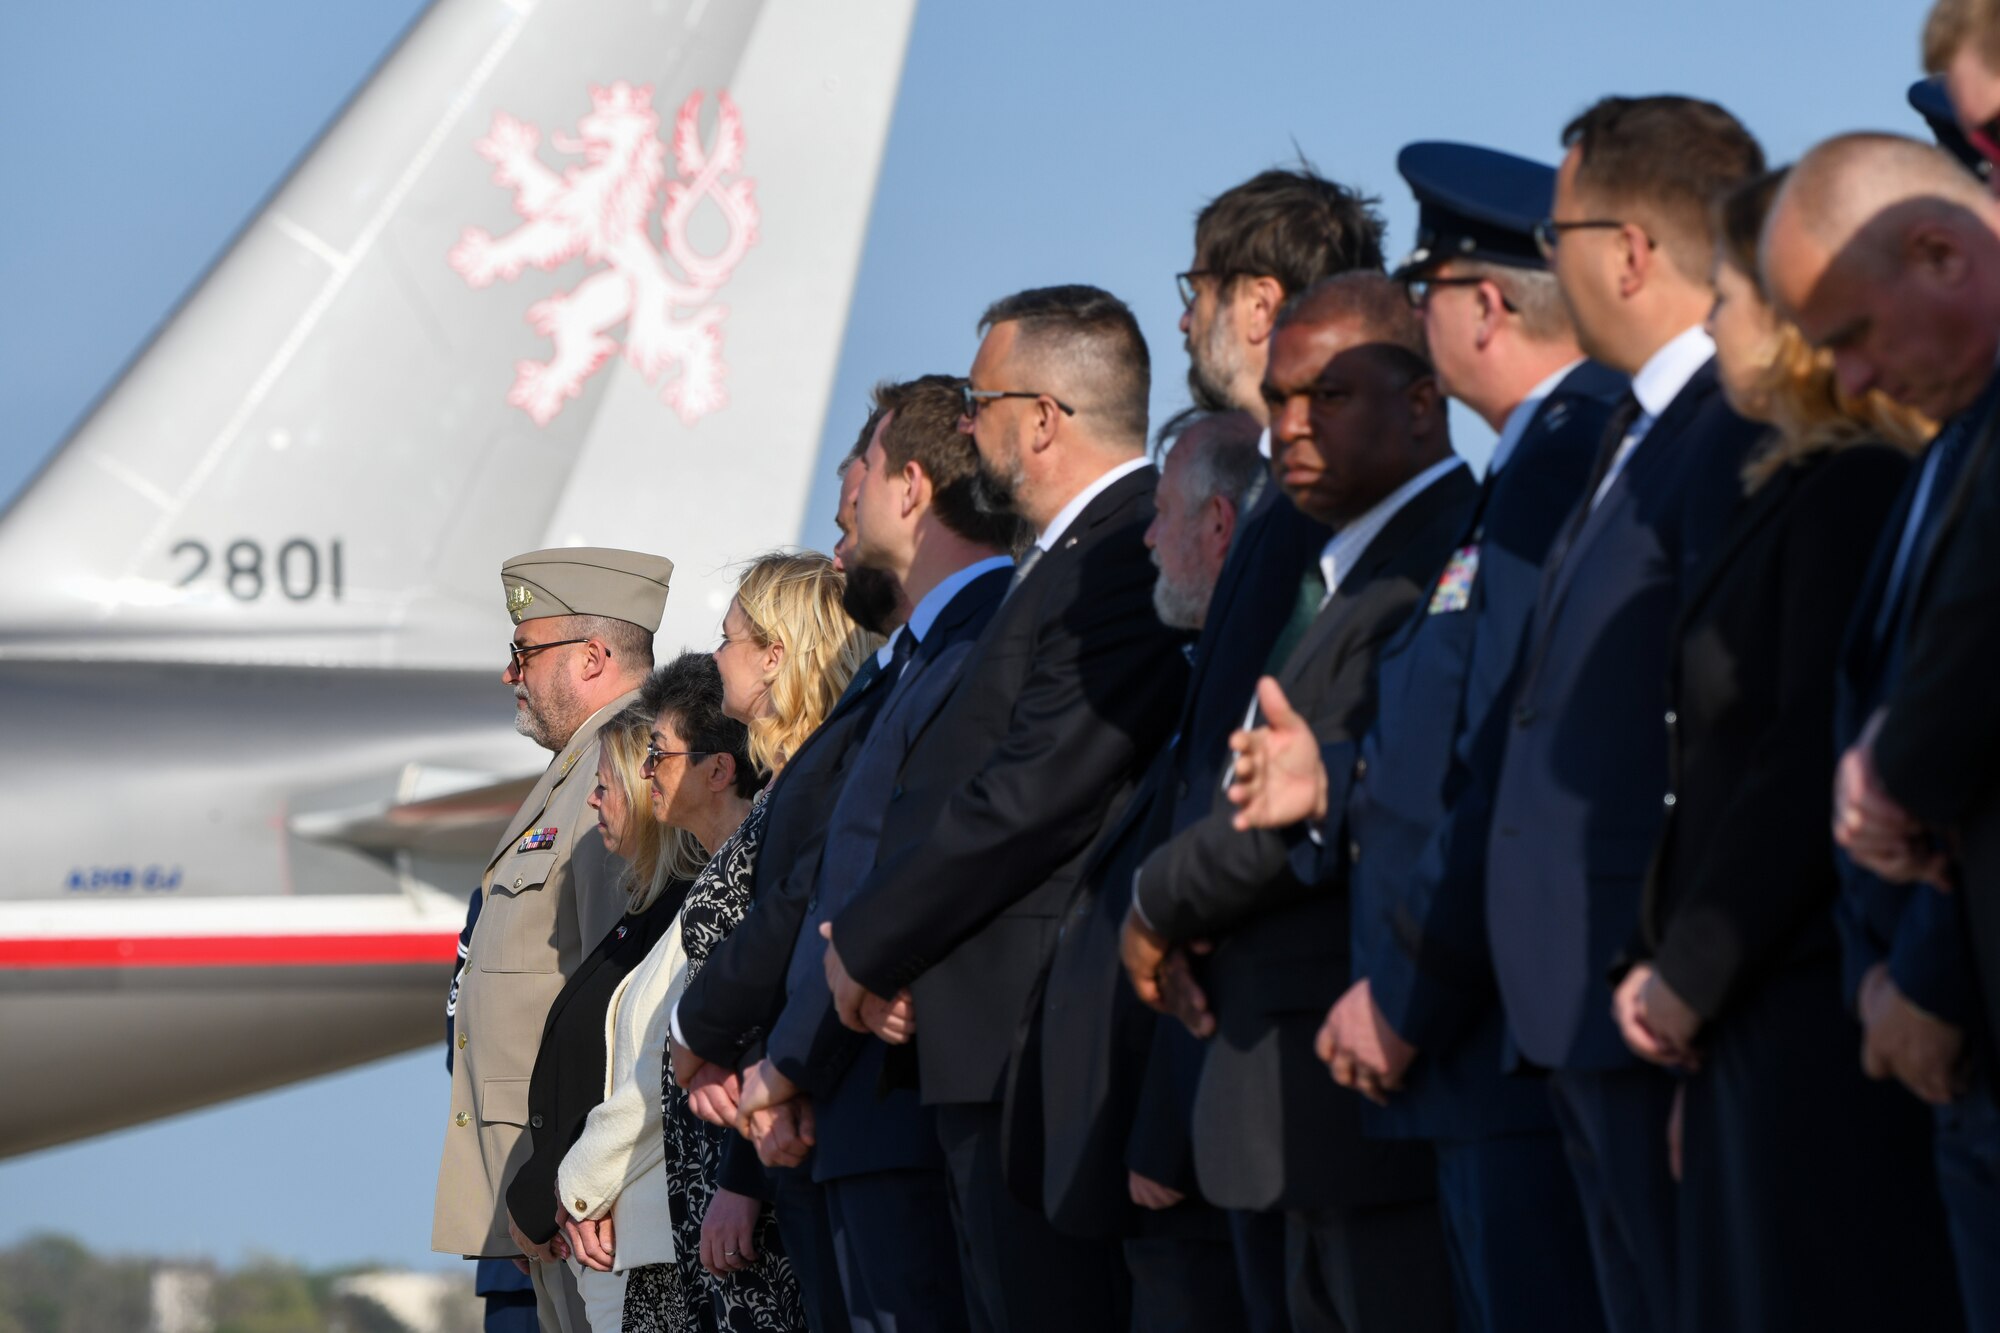 Distinguished guests listen to Lt. Col. Micheal Zgoda, U.S. Air Force attaché to the Czech Republic, as he makes opening remarks during the dignified transfer of  Brigadier Gen. František Moravec at Joint Base Andrews, Md., April 25, 2022.